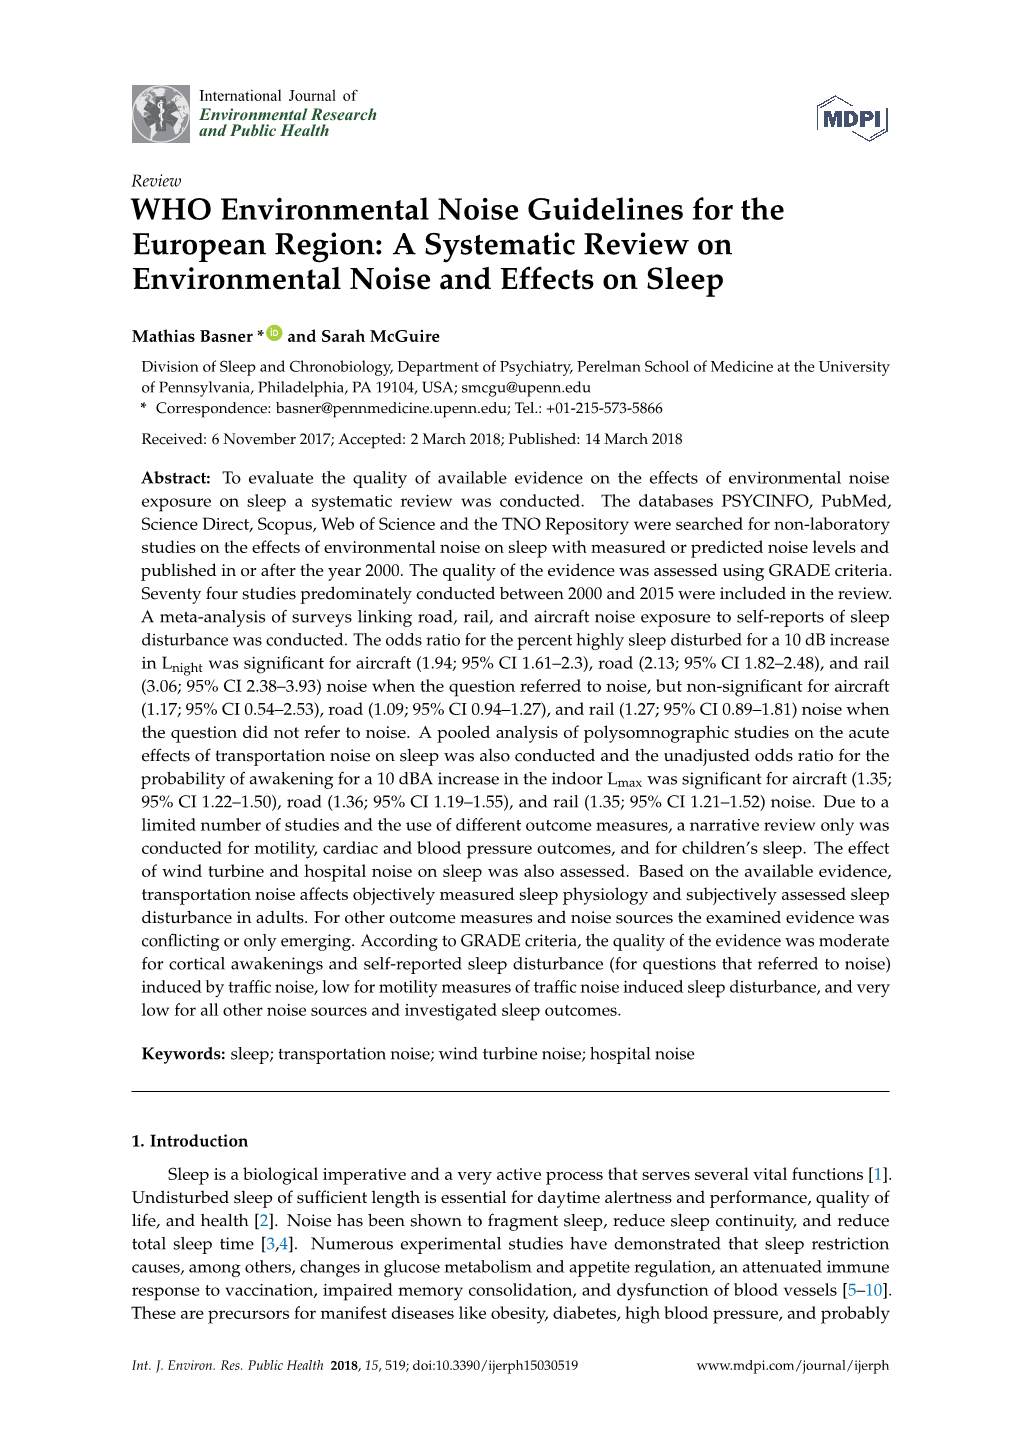 WHO Environmental Noise Guidelines for the European Region: a Systematic Review on Environmental Noise and Effects on Sleep